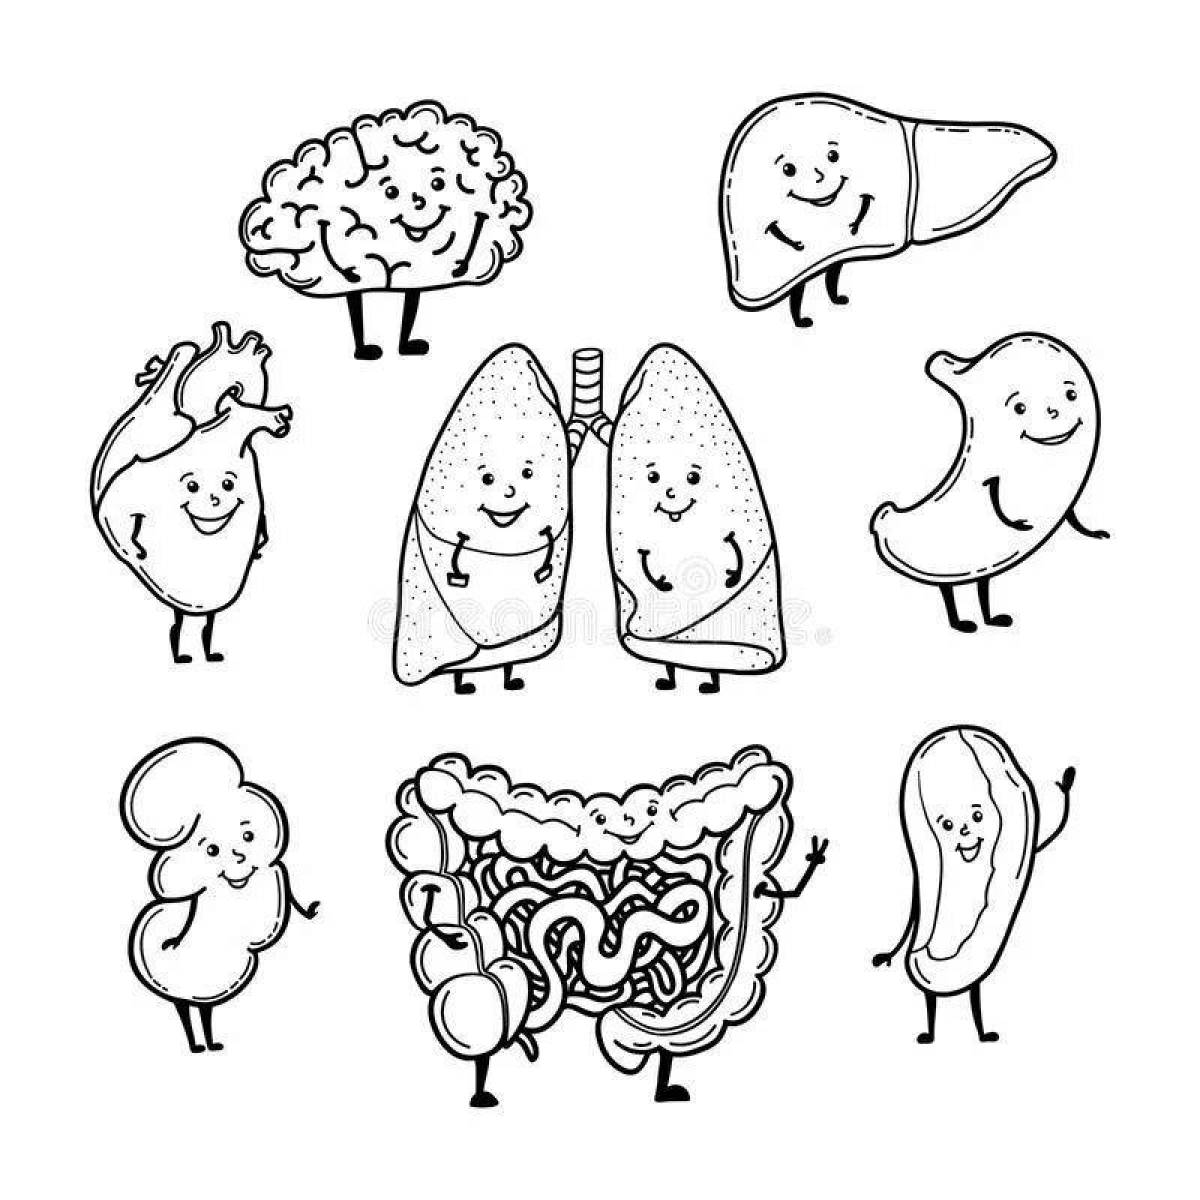 A fascinating coloring book of human organs for children